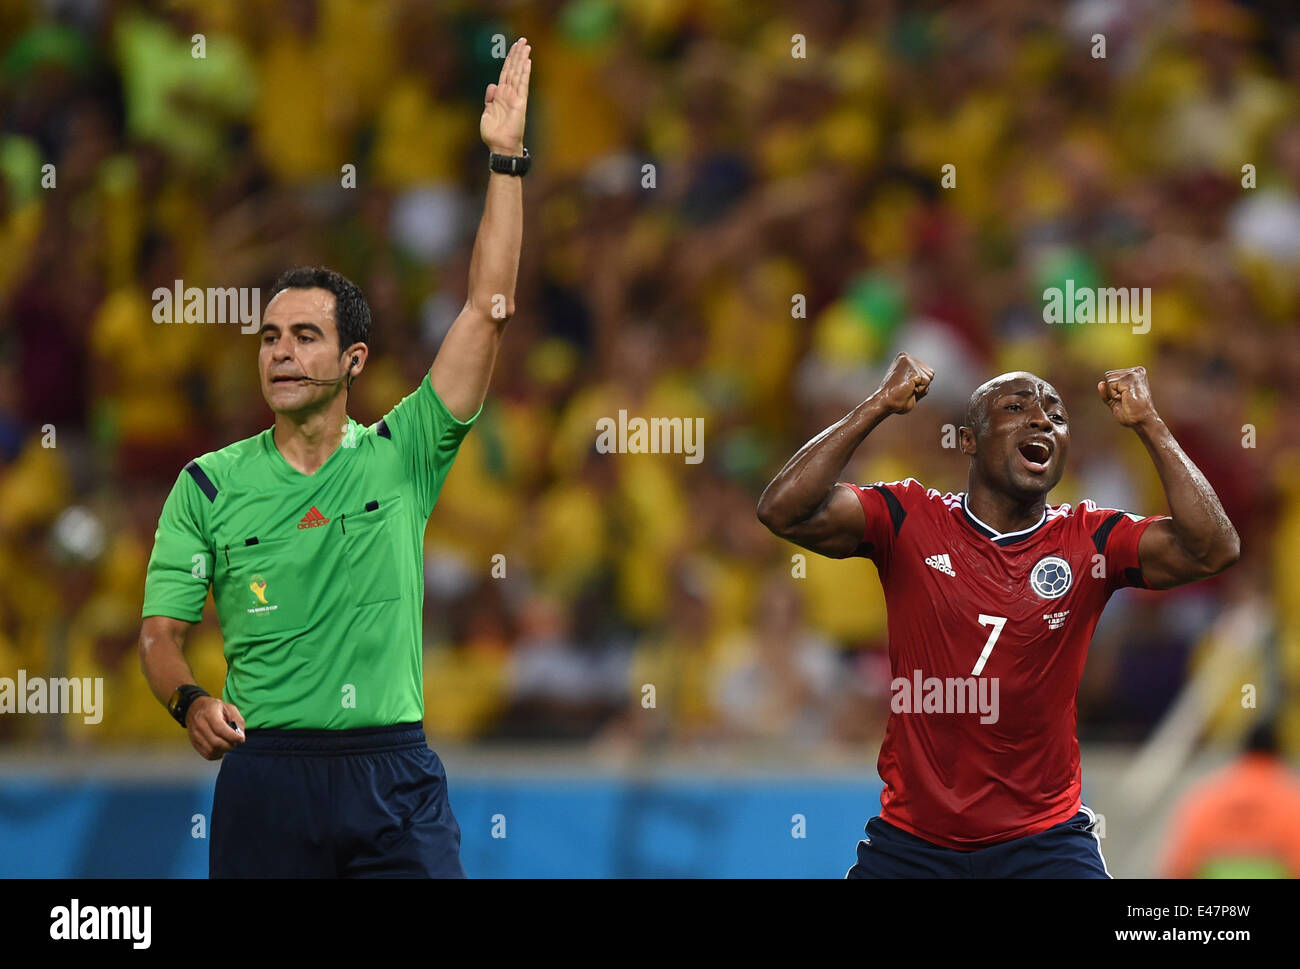 Fortaleza, Brazil. 04th July, 2014. Pablo Armero (R) of Colombia reacts next to referee Carlos Velasco Carballo of Spain during the FIFA World Cup 2014 quarter final match soccer between Brazil and Colombia at the Estadio Castelao in Fortaleza, Brazil, 04 July 2014. Photo: Marius Becker/dpa/Alamy Live News Stock Photo